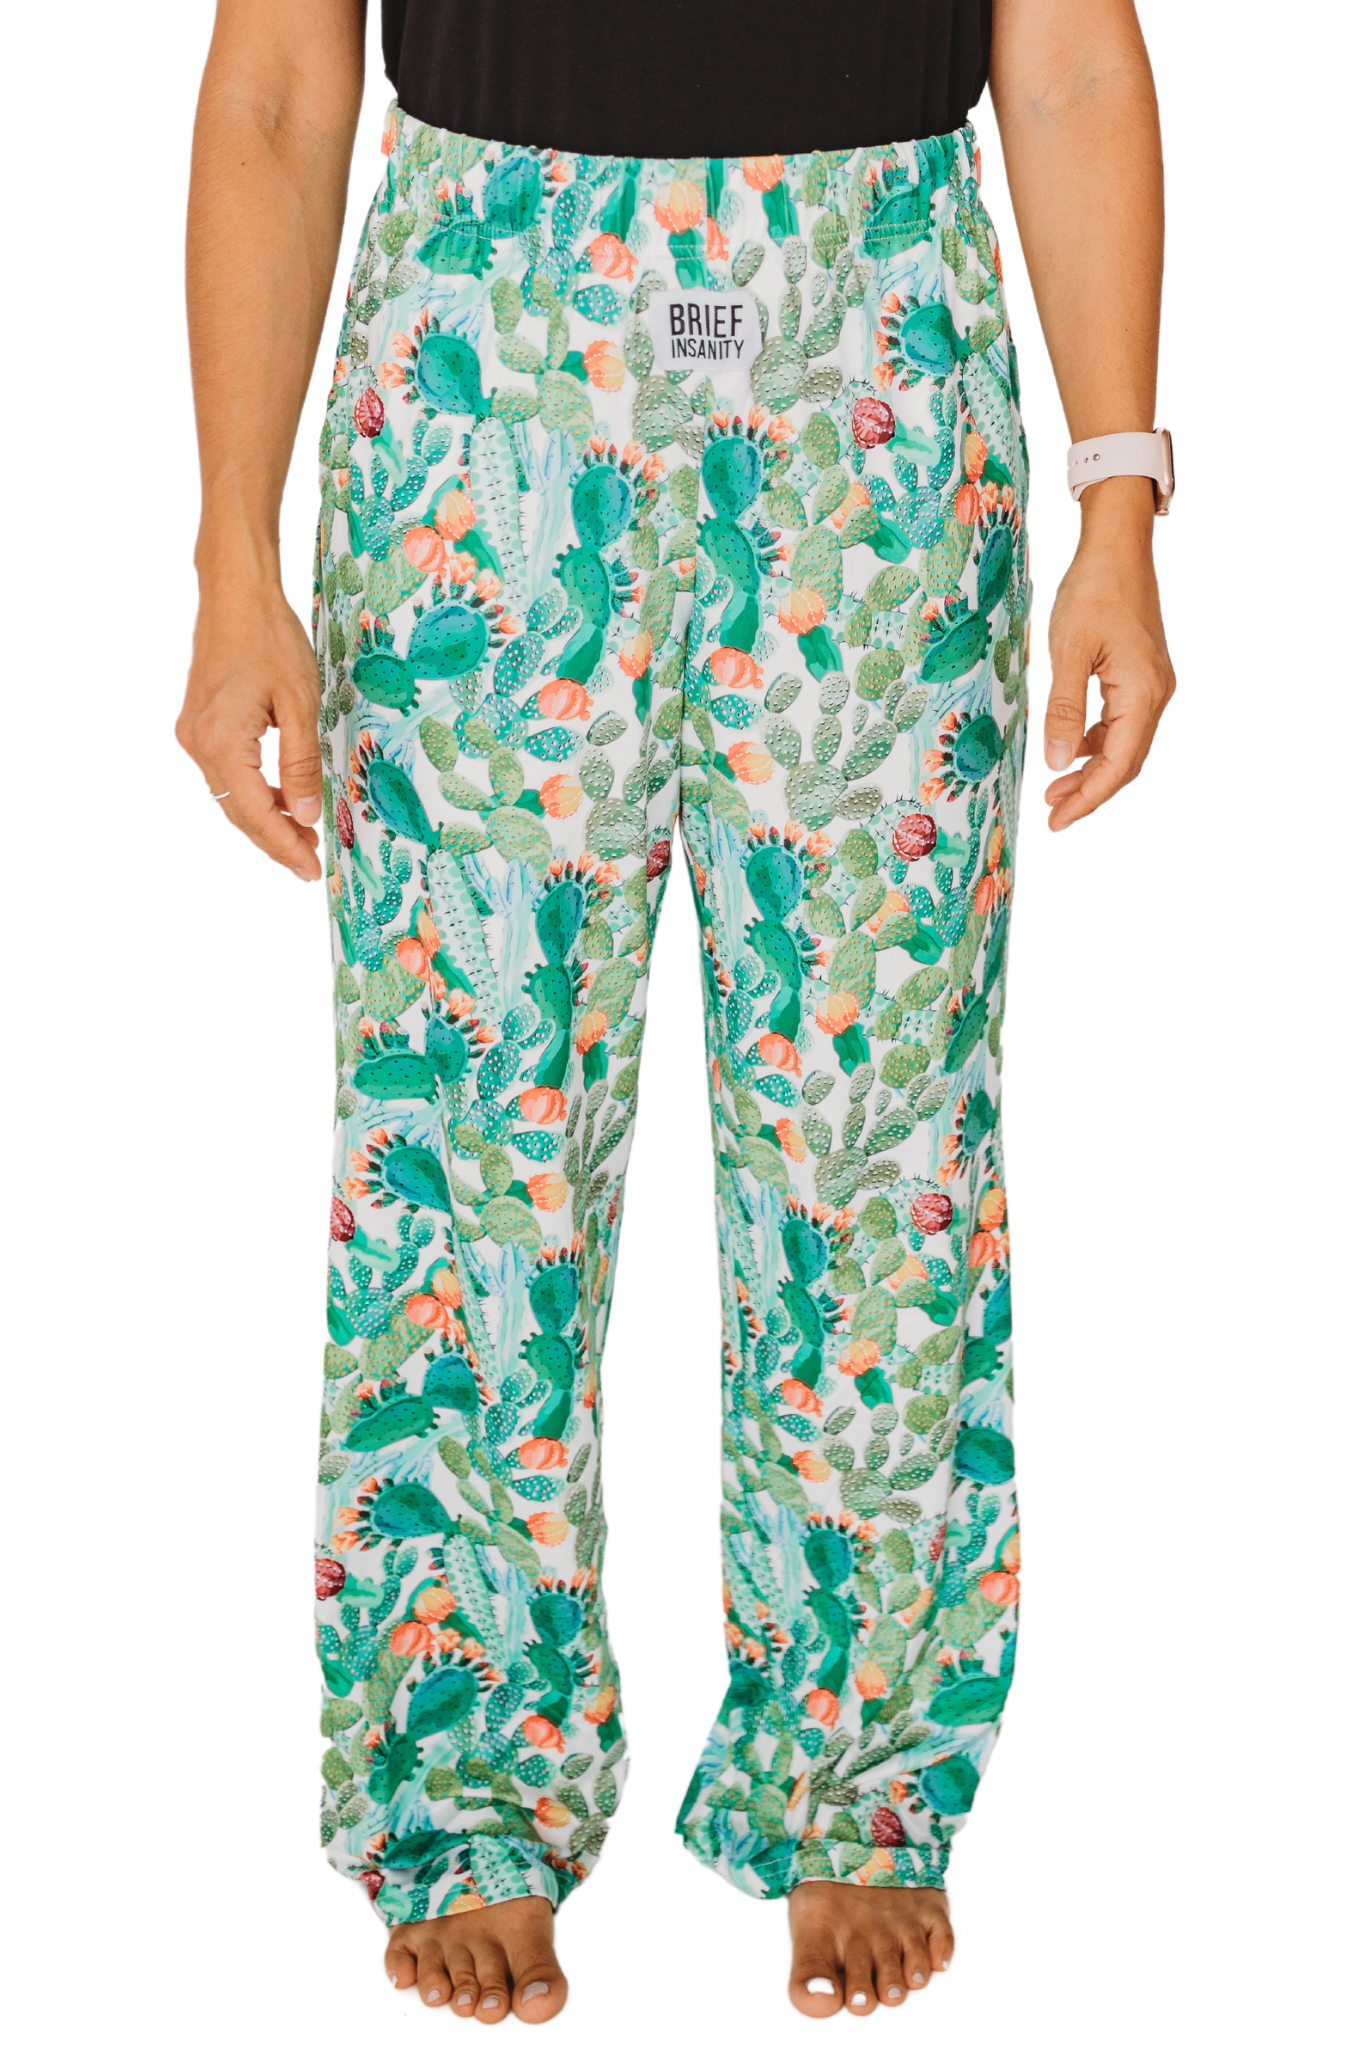 Waist down photo of model wearing Cactus Floral pajama lounge pants front view (white background)